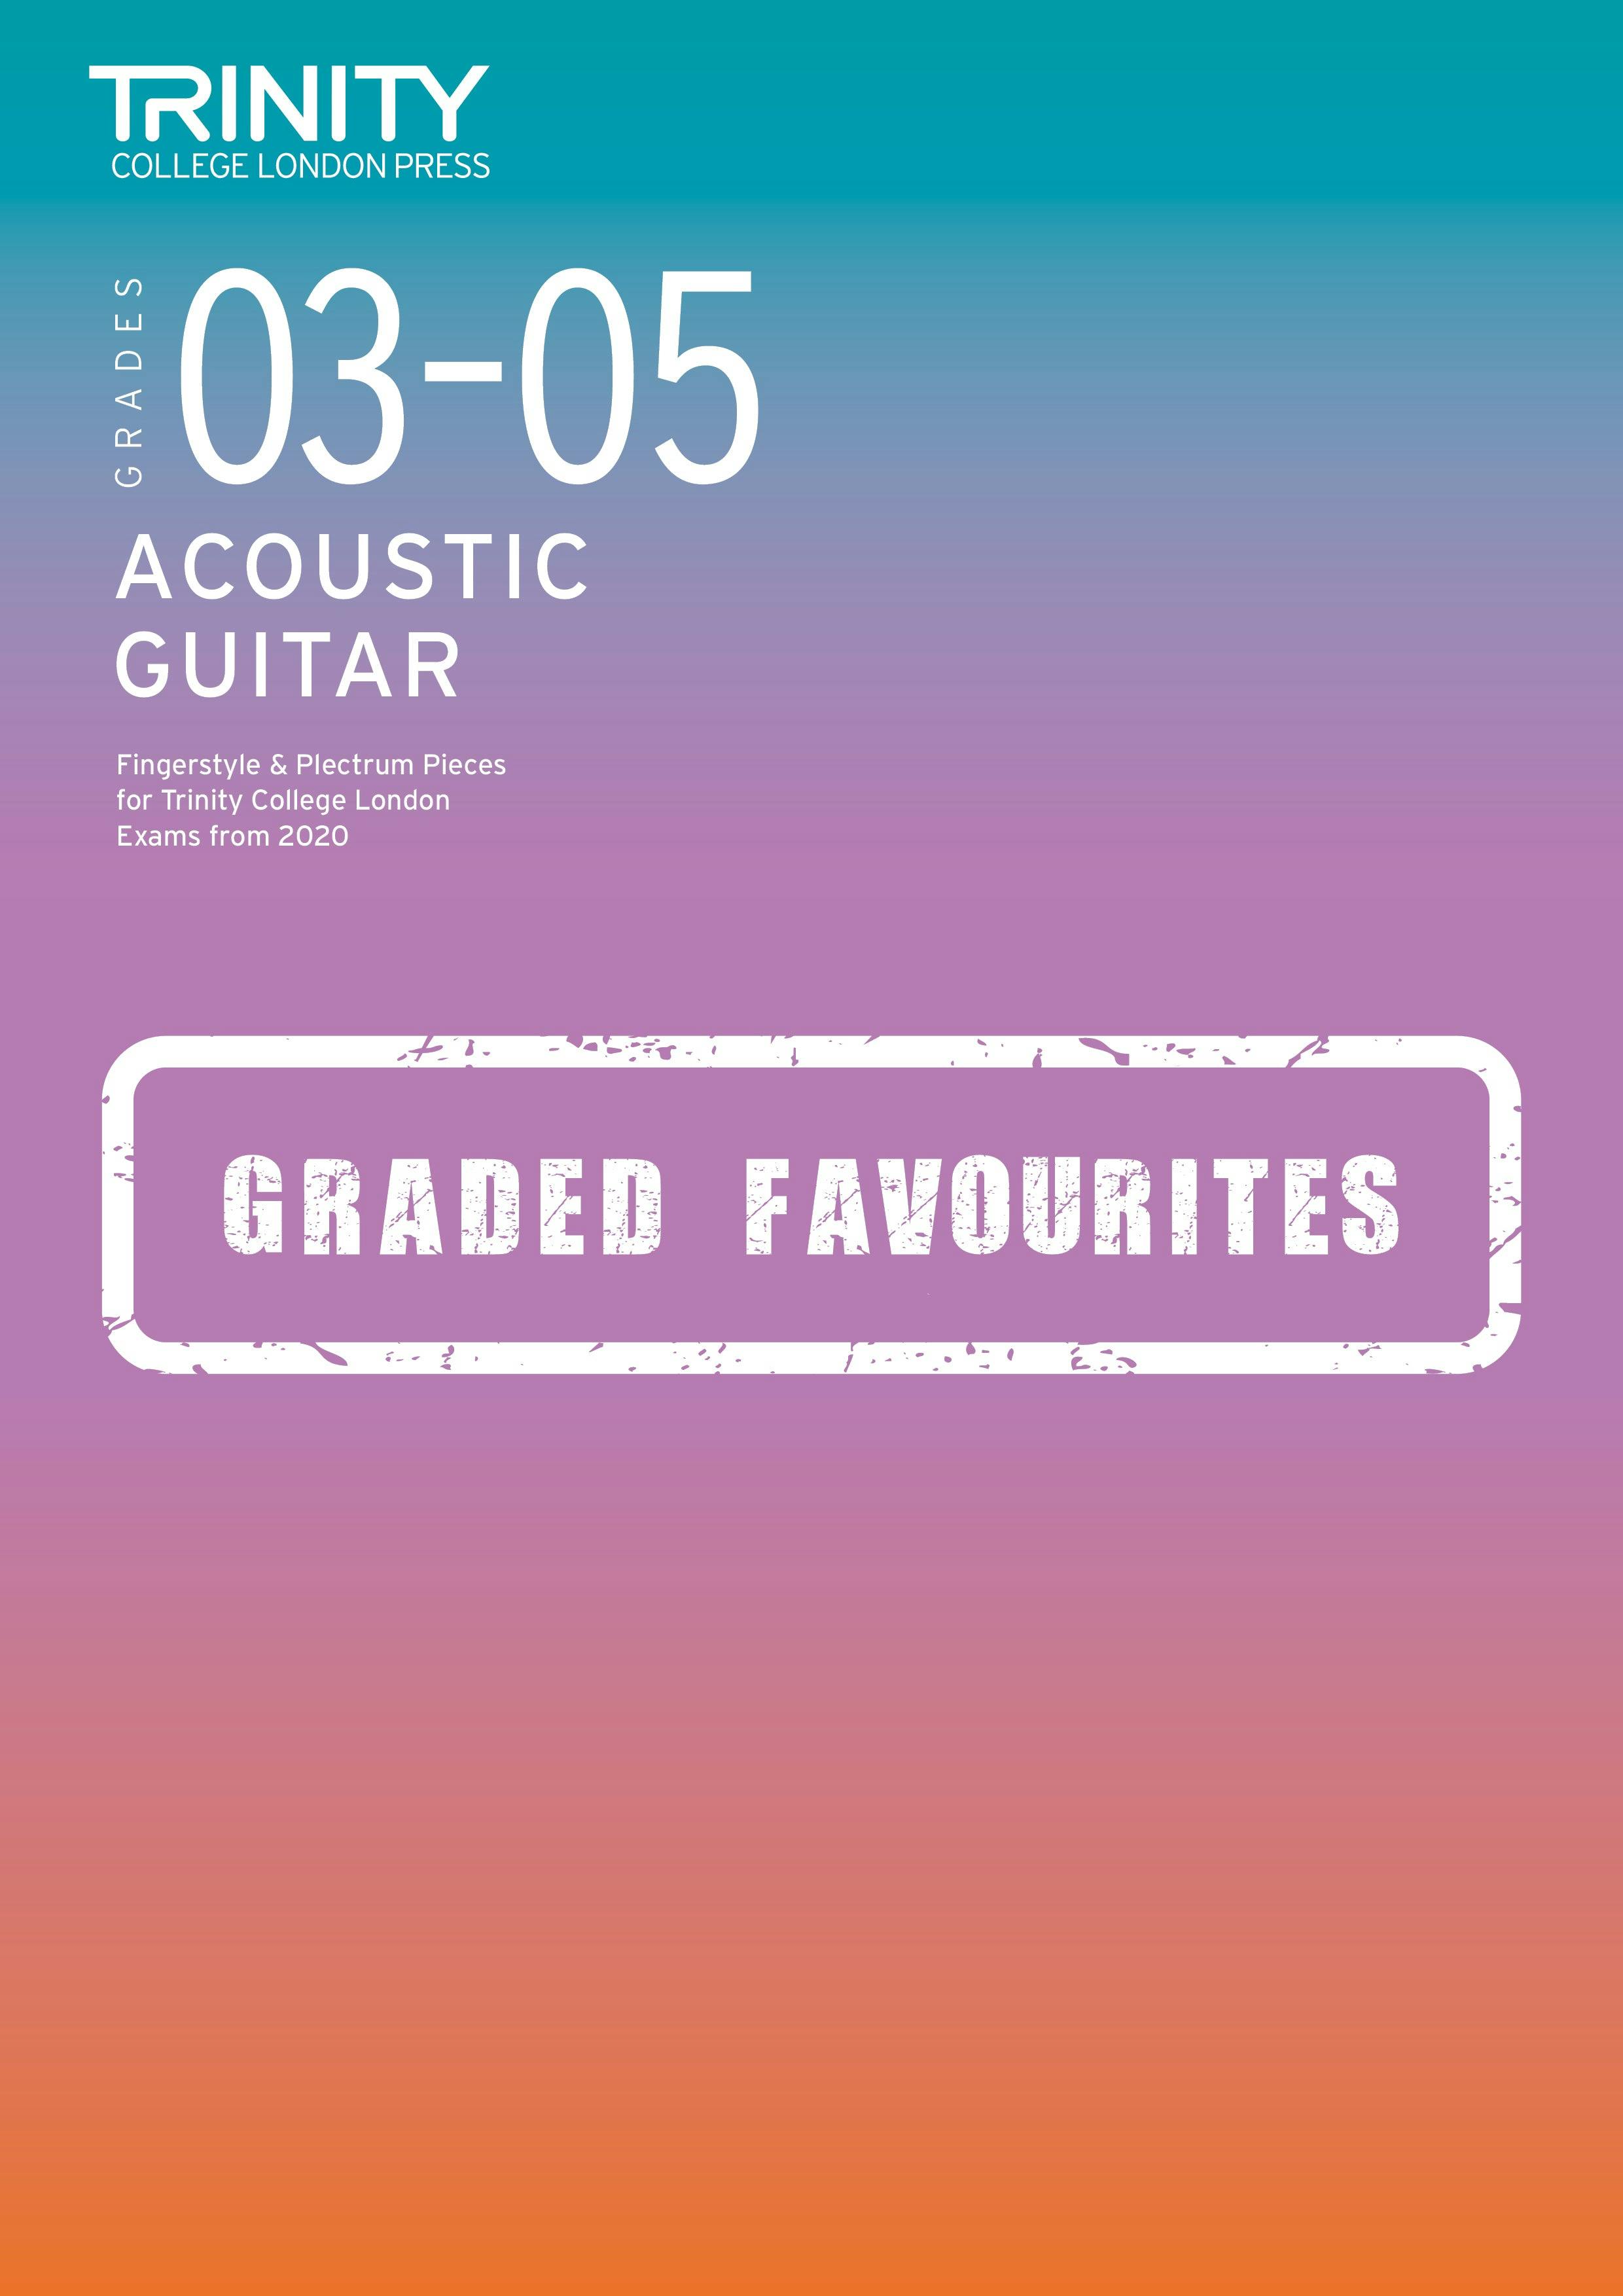 Graded Acoustic Guitar Favourites Exam Pieces from 2020 Grades 3-5